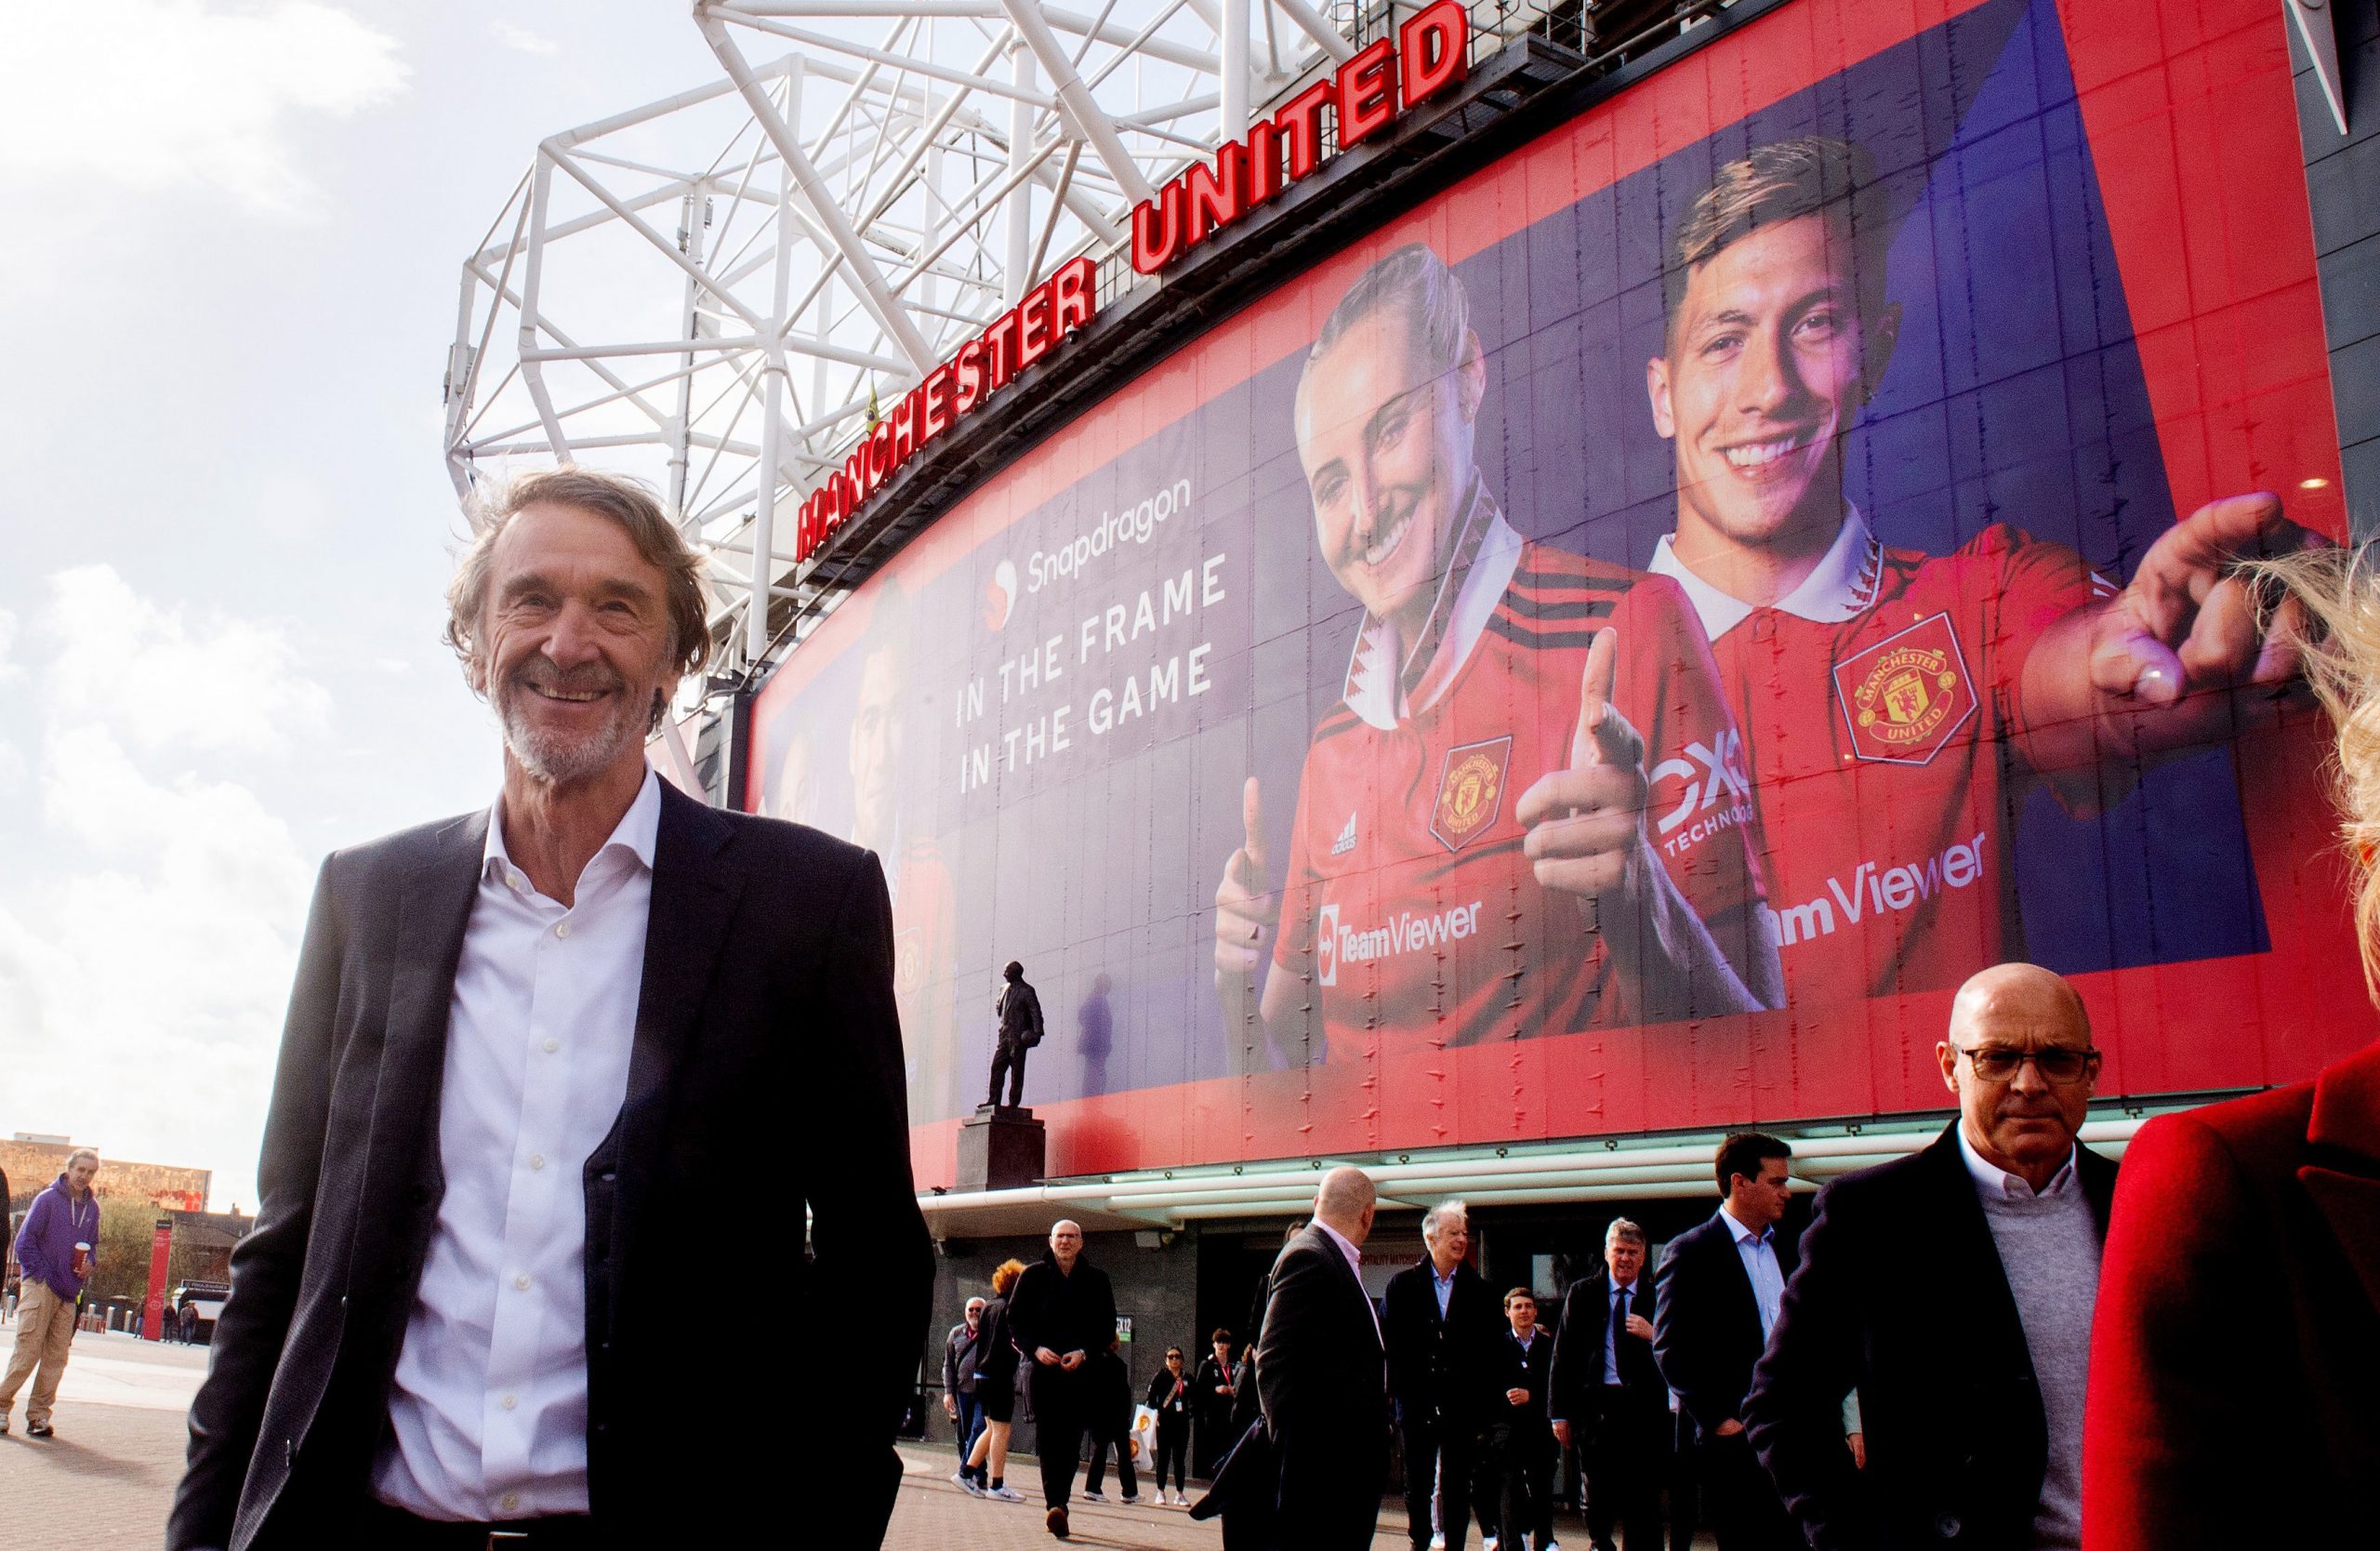 Sir Jim Ratcliffe insists he’s STILL in Man Utd takeover race despite reports Qataris are expected to buy club